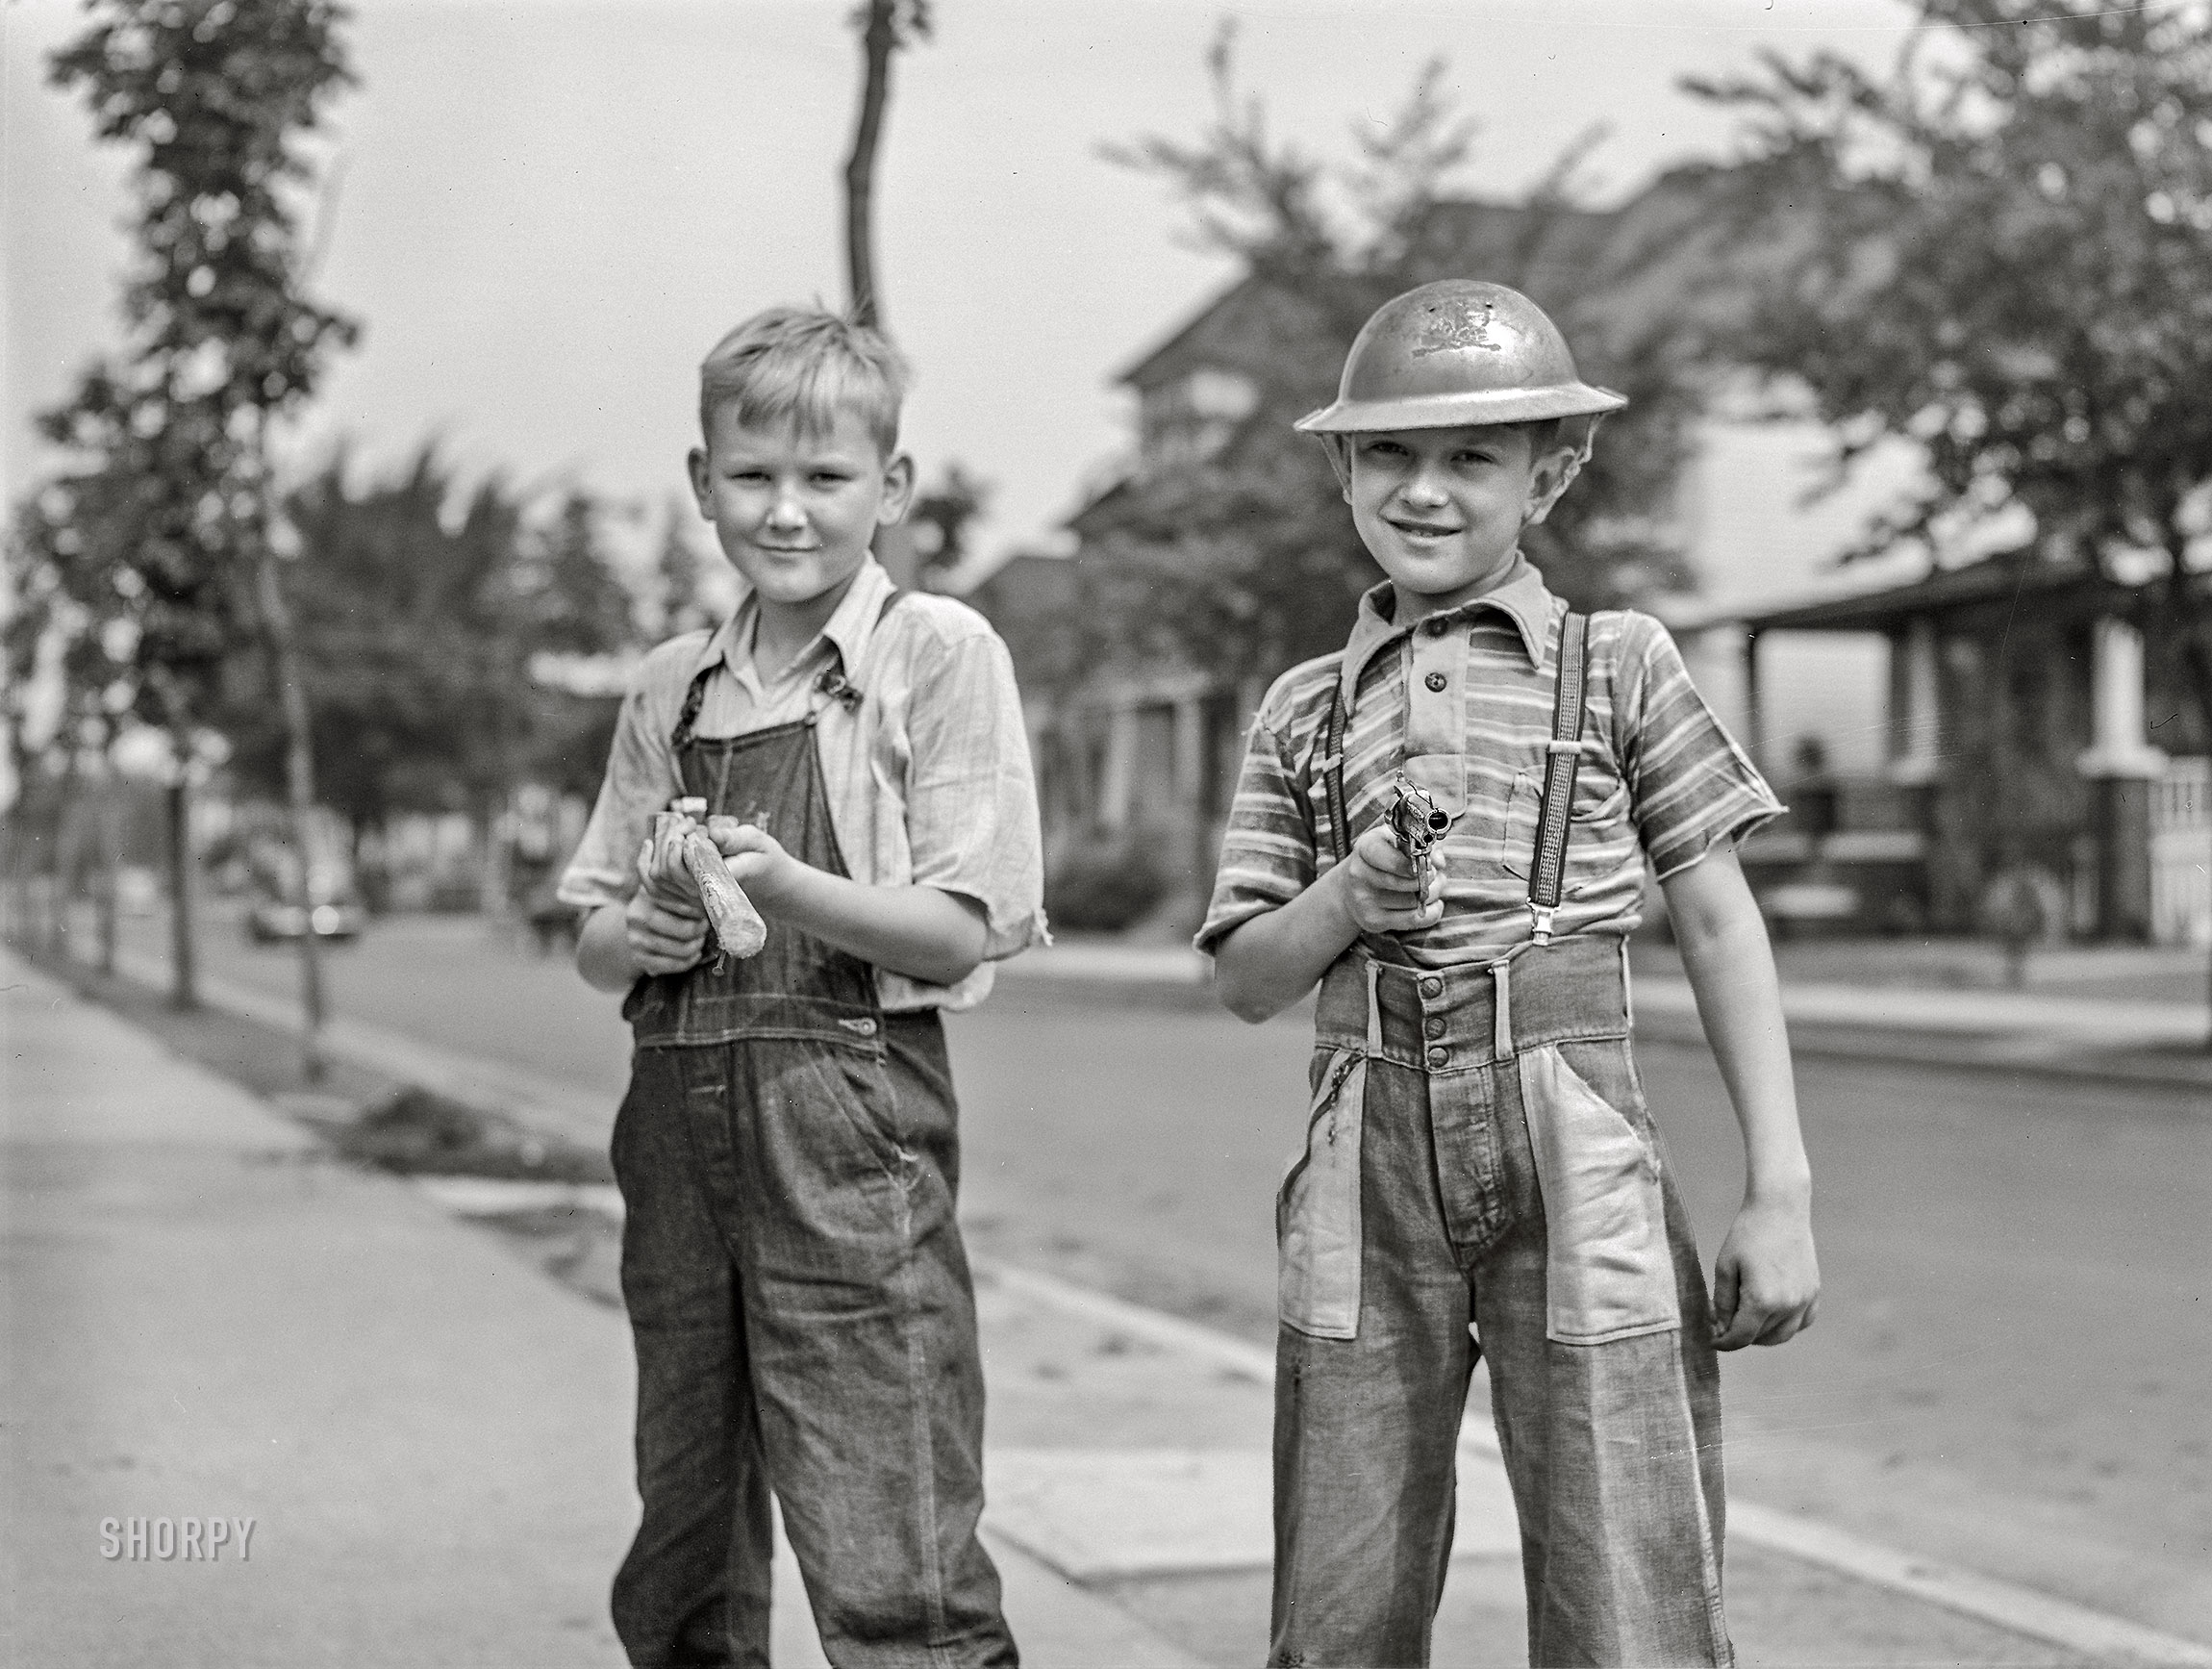 August 1942. "Detroit, Michigan. Boys in the Polish district." Acetate negative by John Vachon for the U.S. Foreign Information Service. View full size.